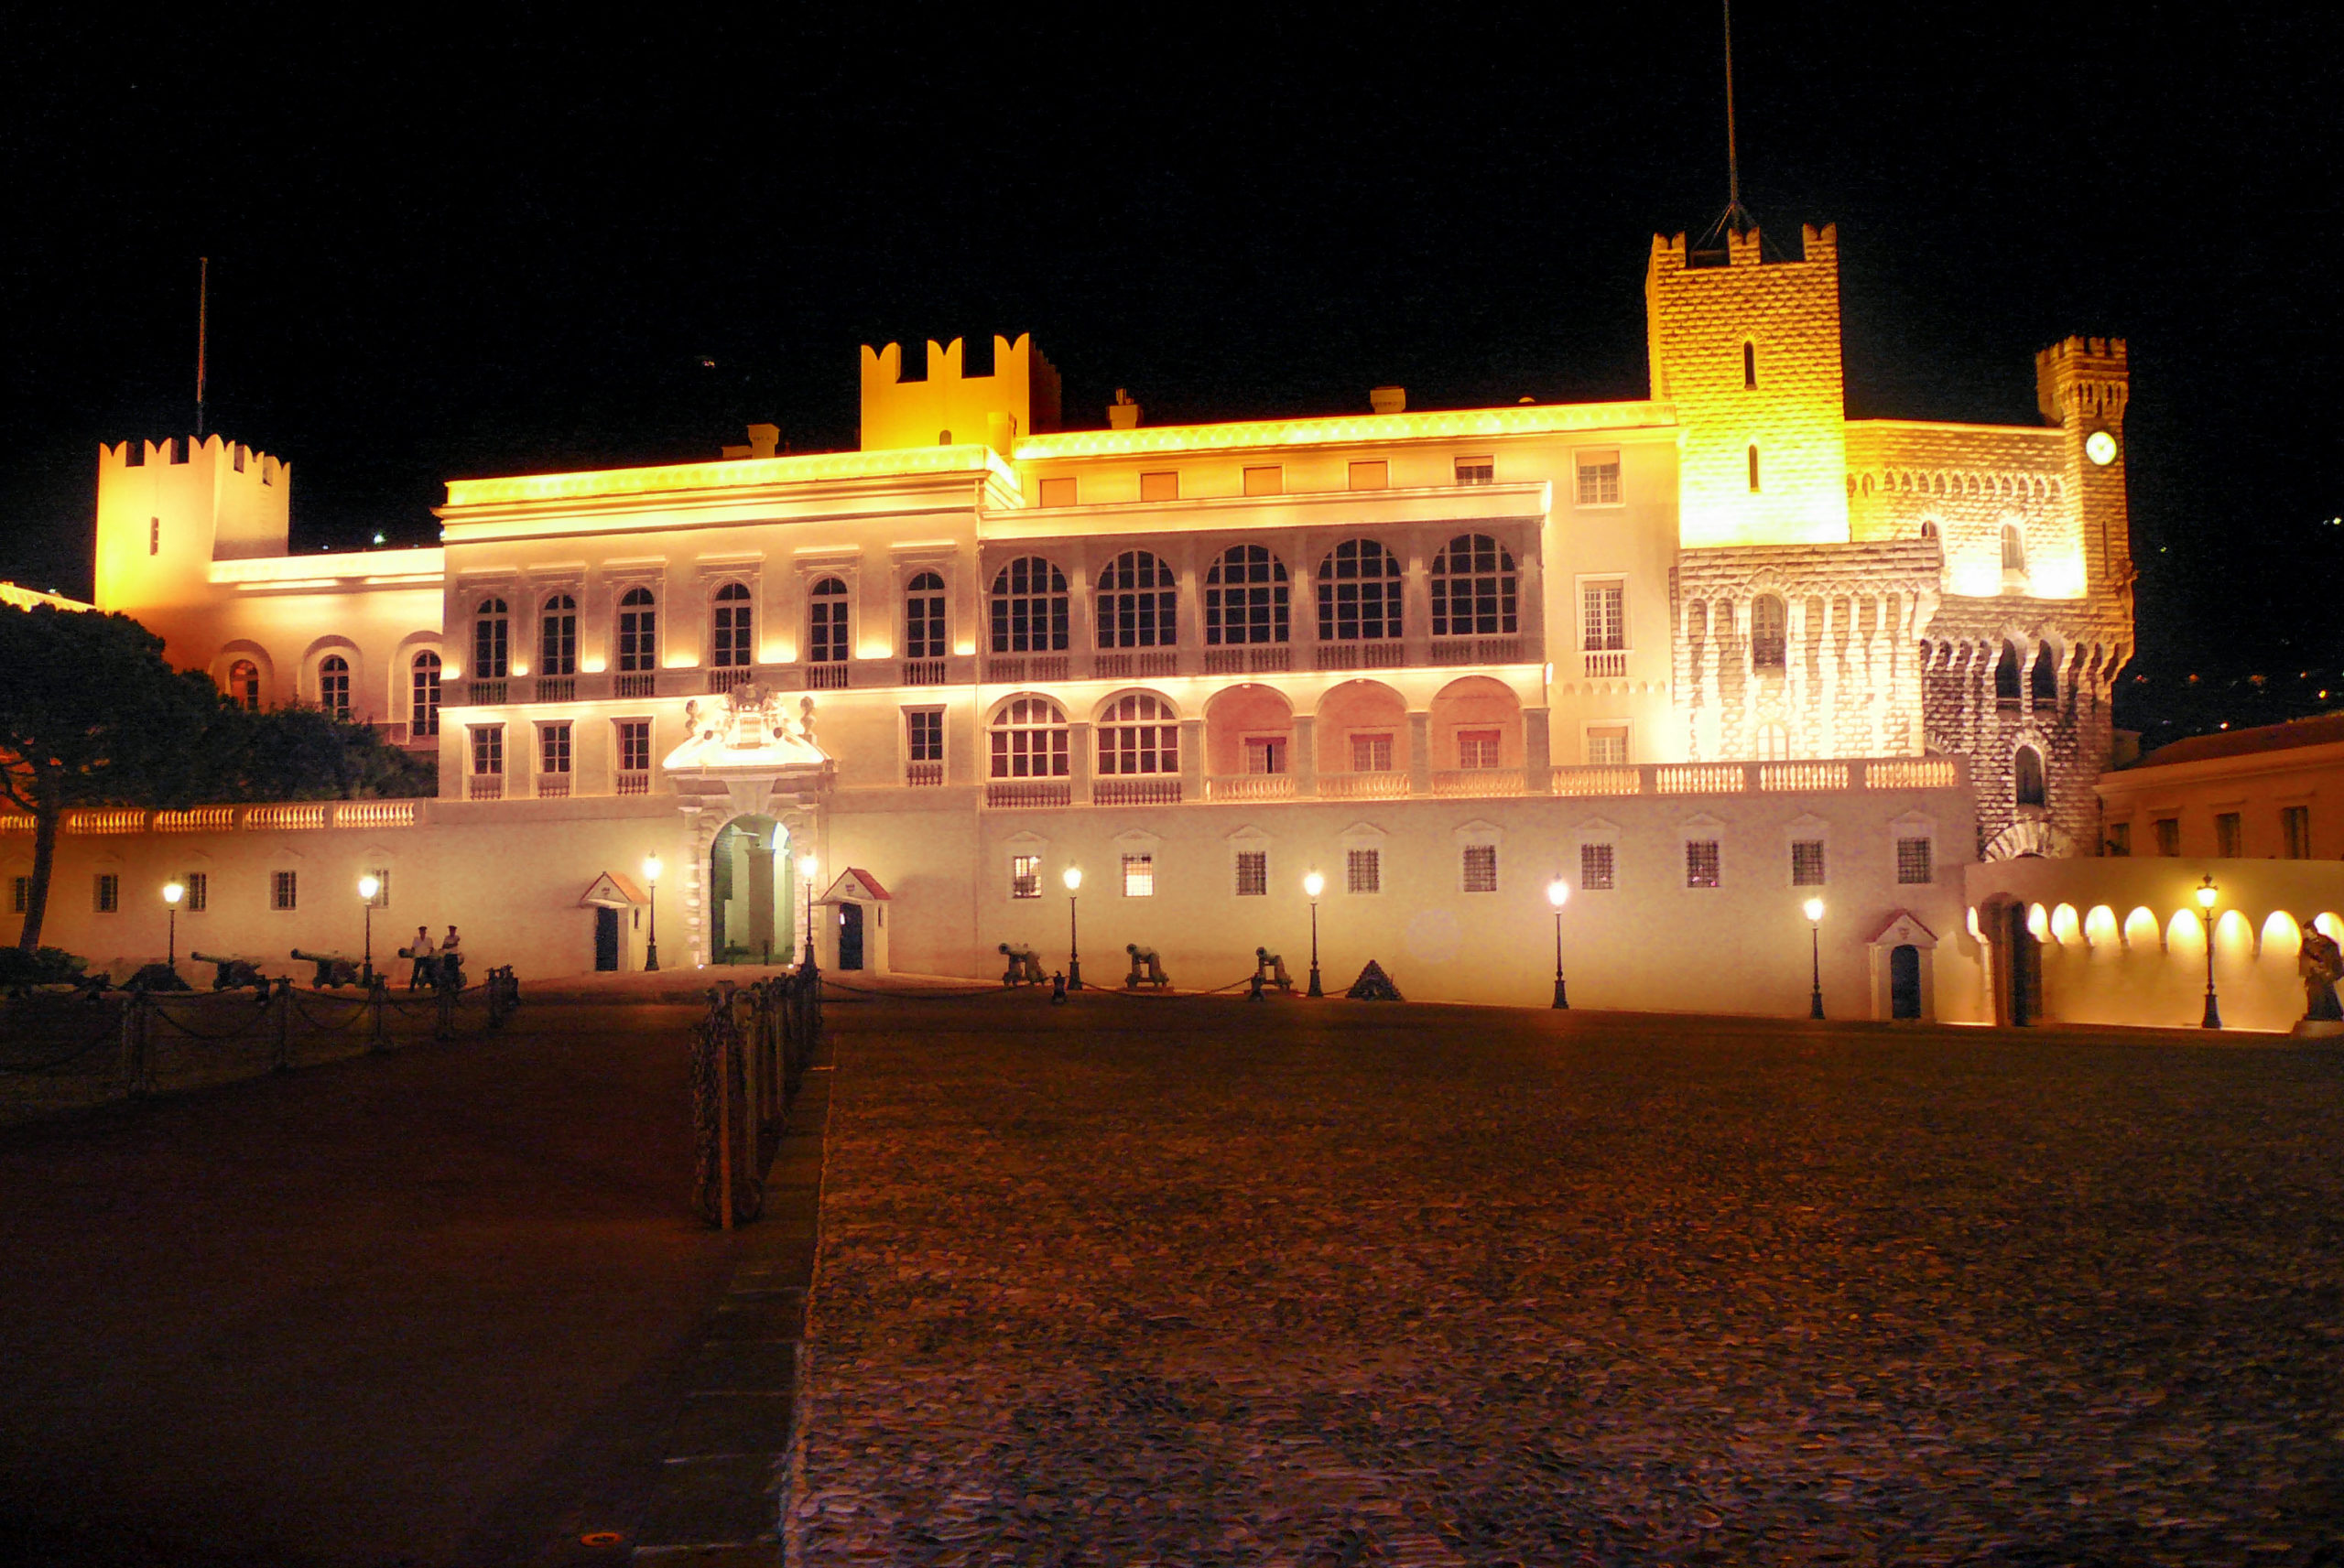 Prince's Palace by night © Santiago Puig Vilado - licence [CC BY-SA 3.0] from Wikimedia Commons